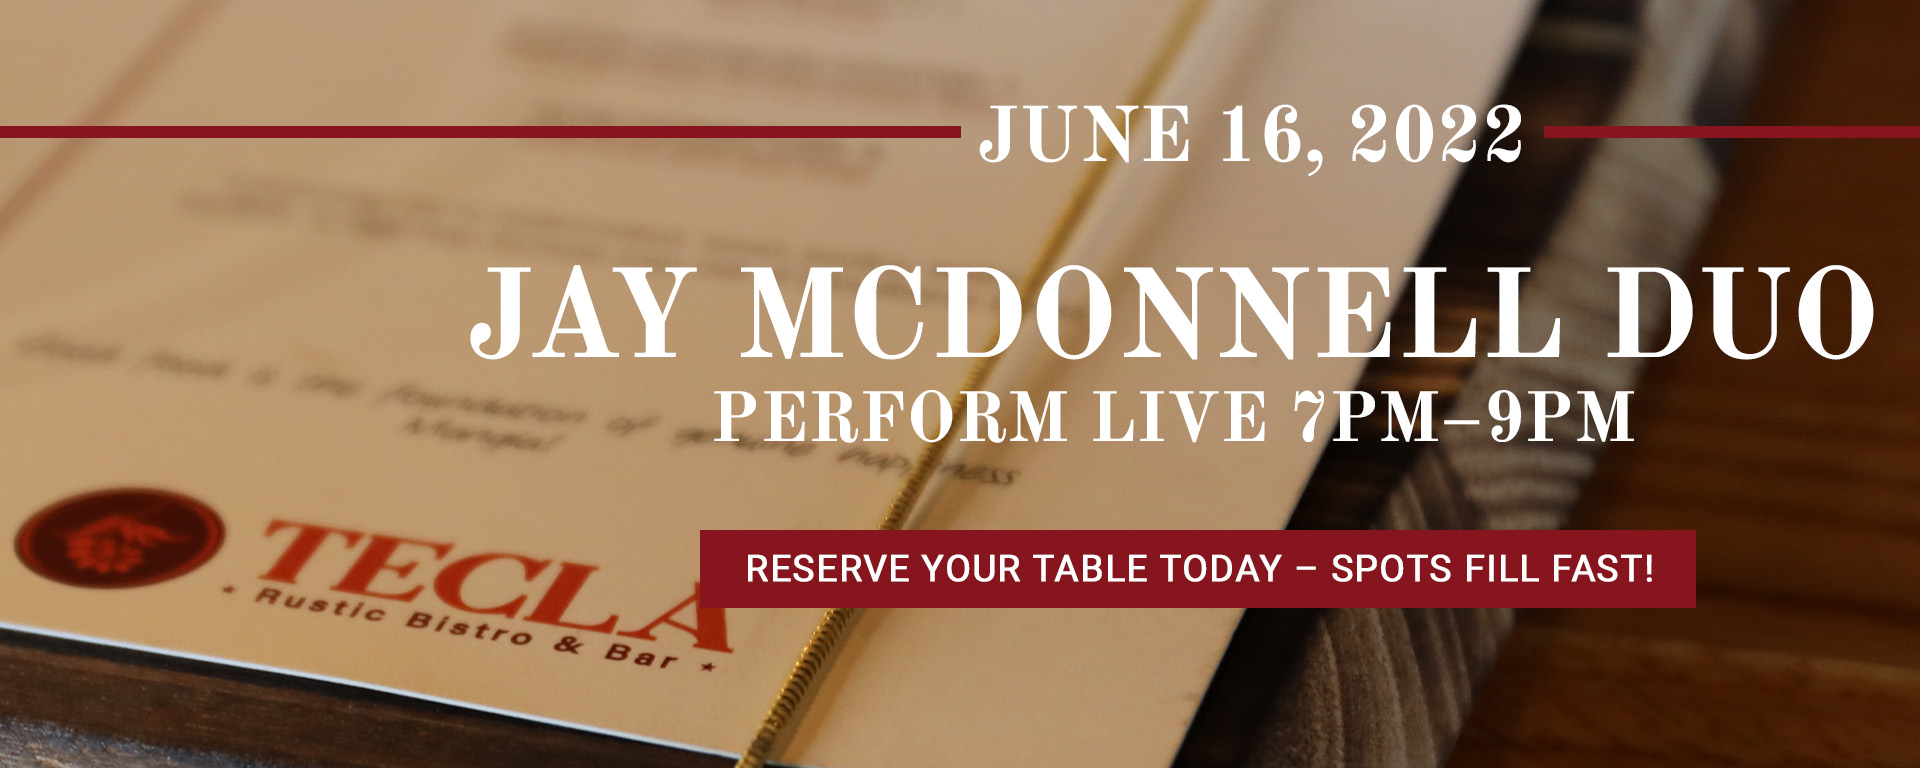 06/16/22 LIVE MUSIC FEATURING JAY MCDONNELL DUO